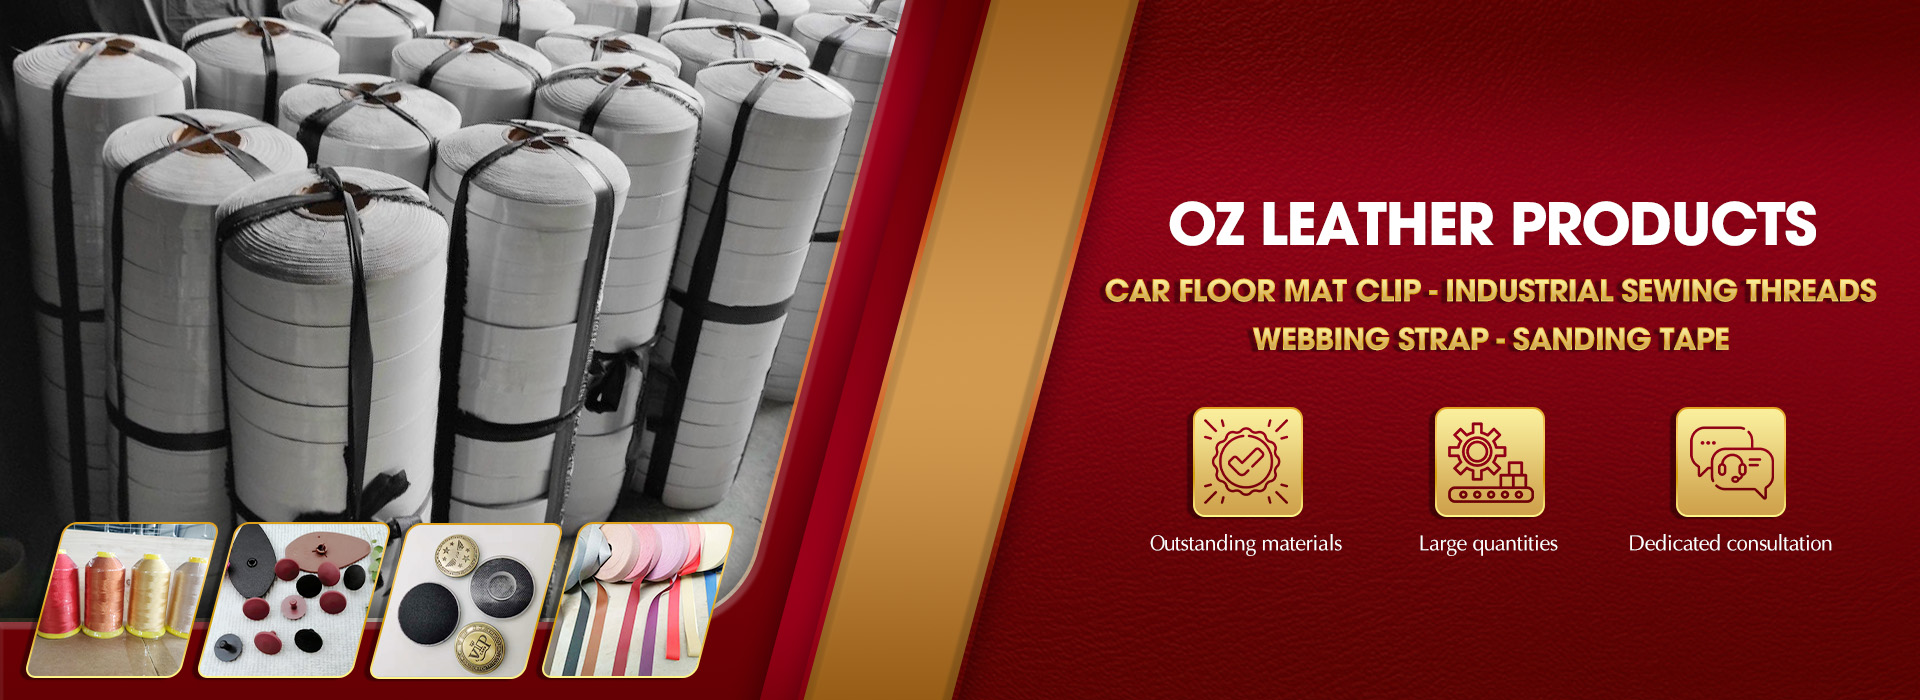 OZ LEATHER JOINT STOCK COMPANY